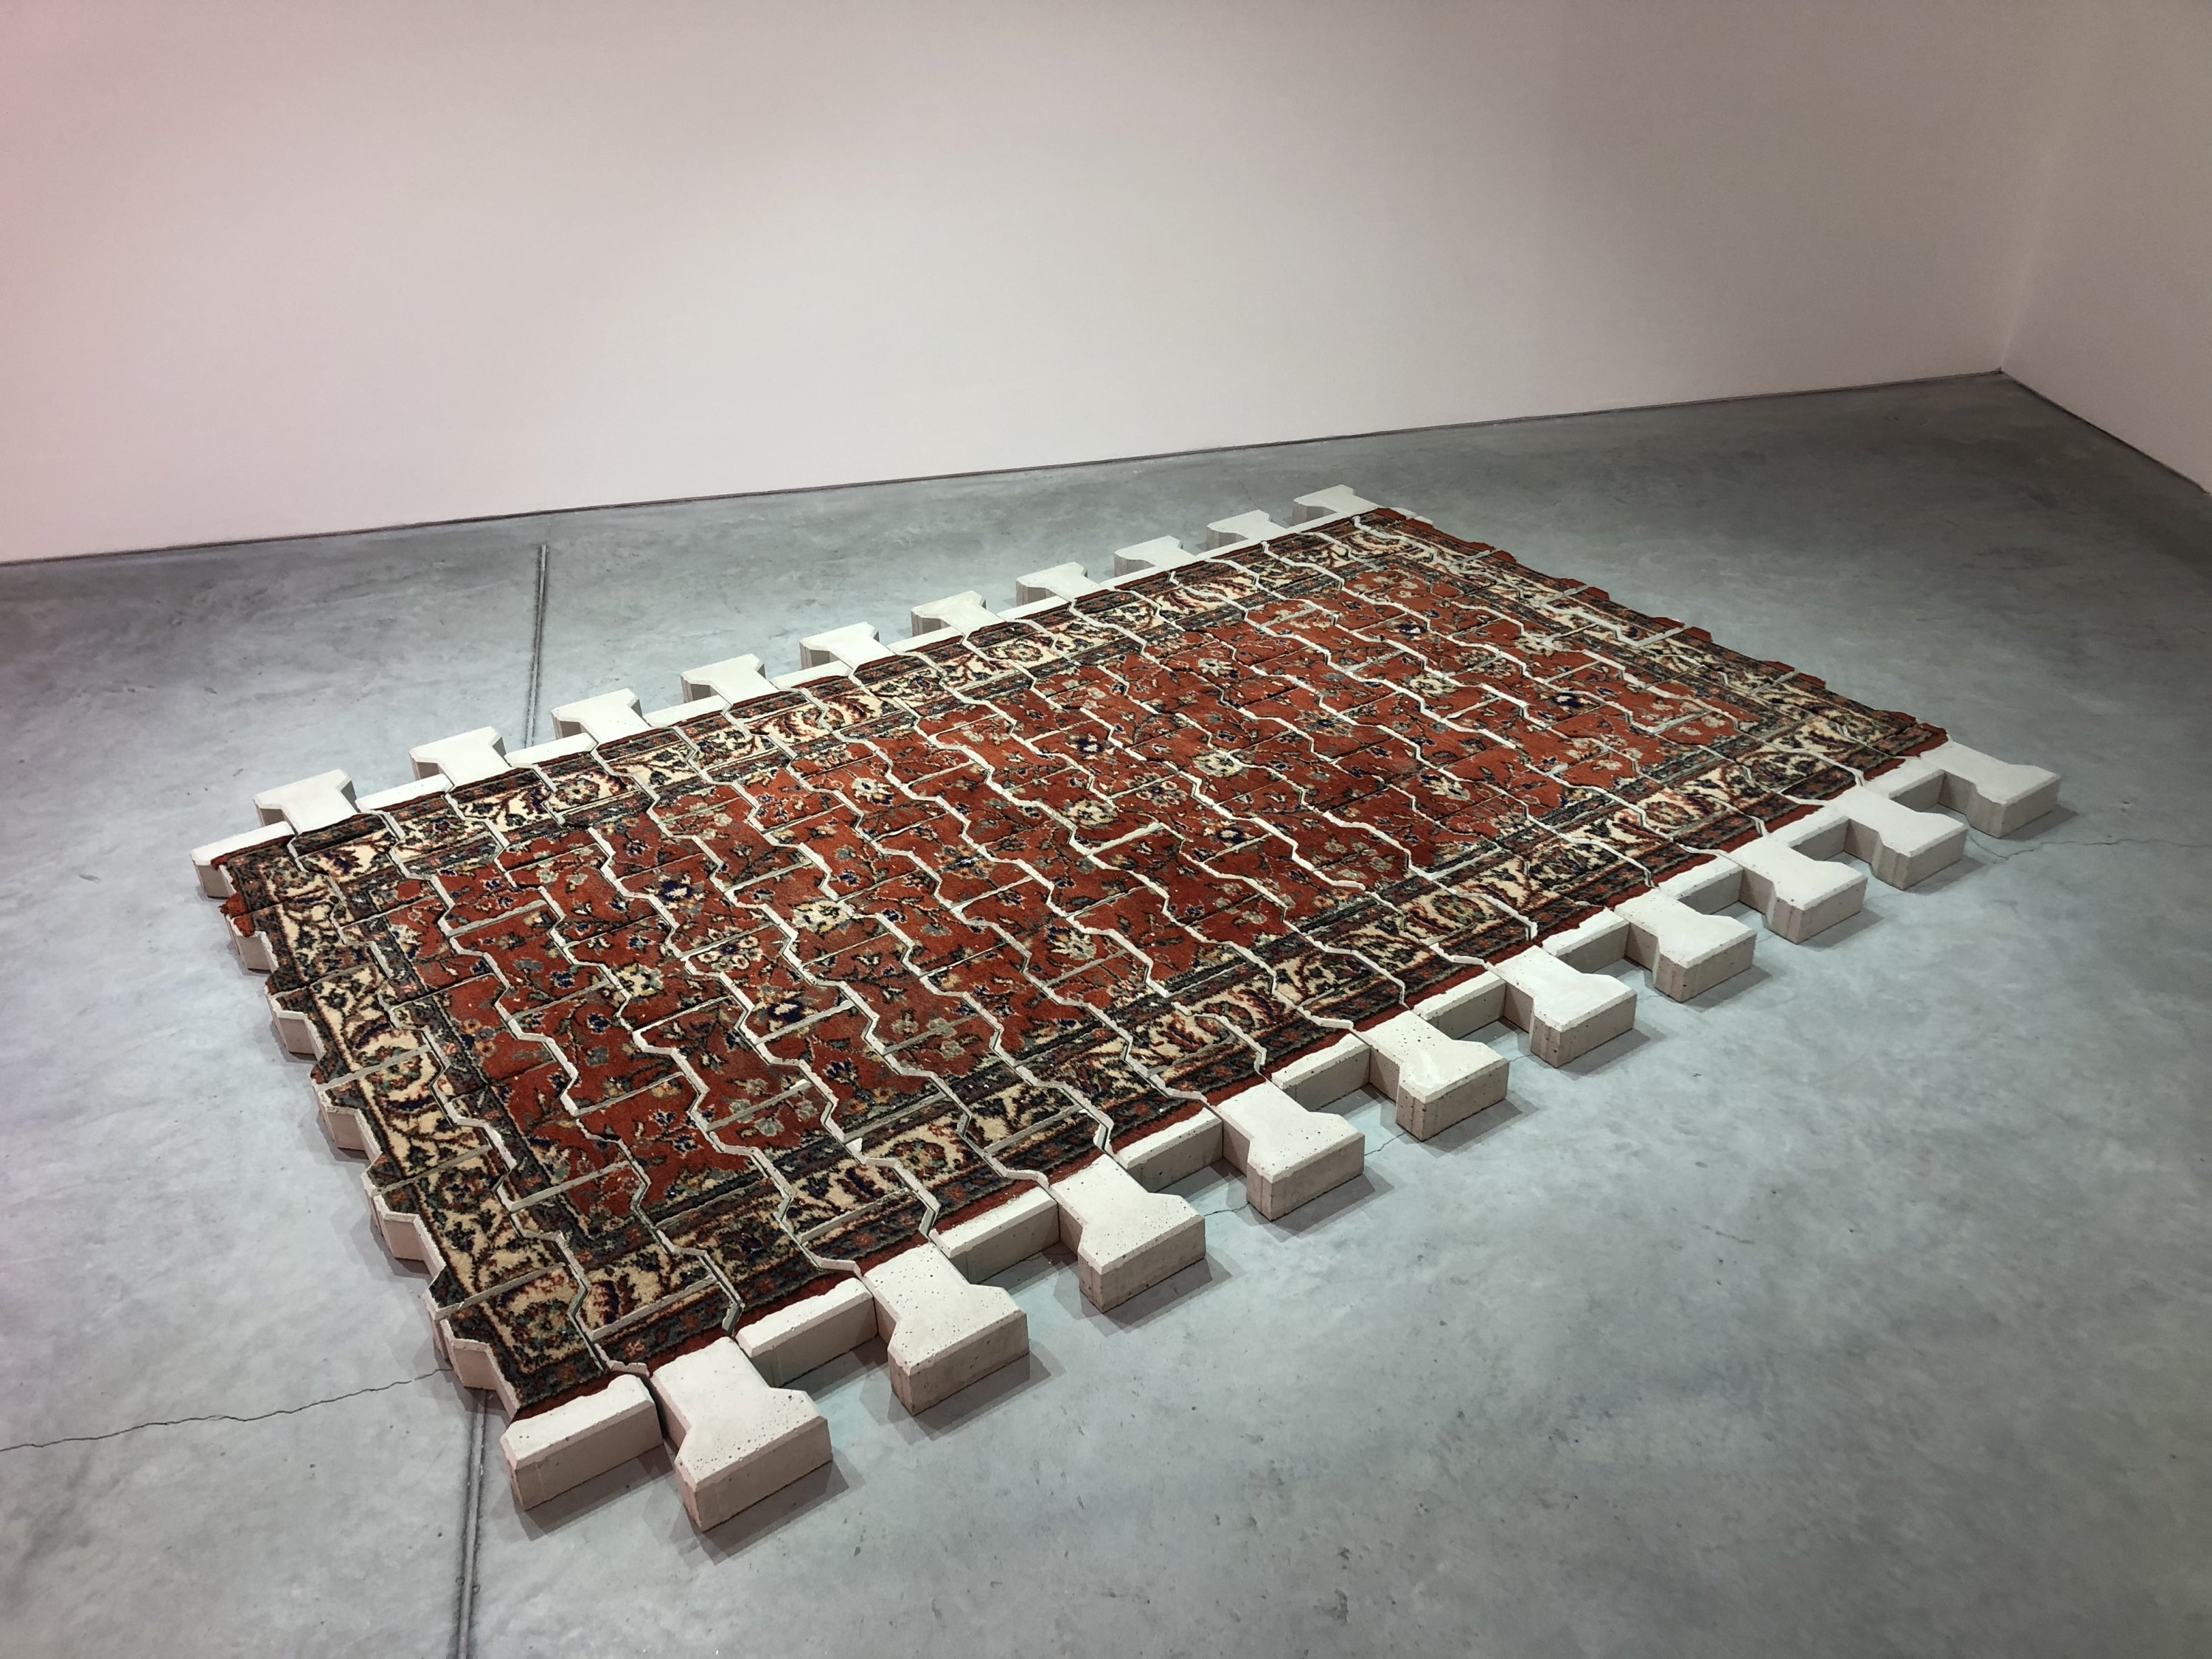 'The Pain of Existence' by Ramazan Can, 2021, concrete, rug. (Photo by Matt Hanson)